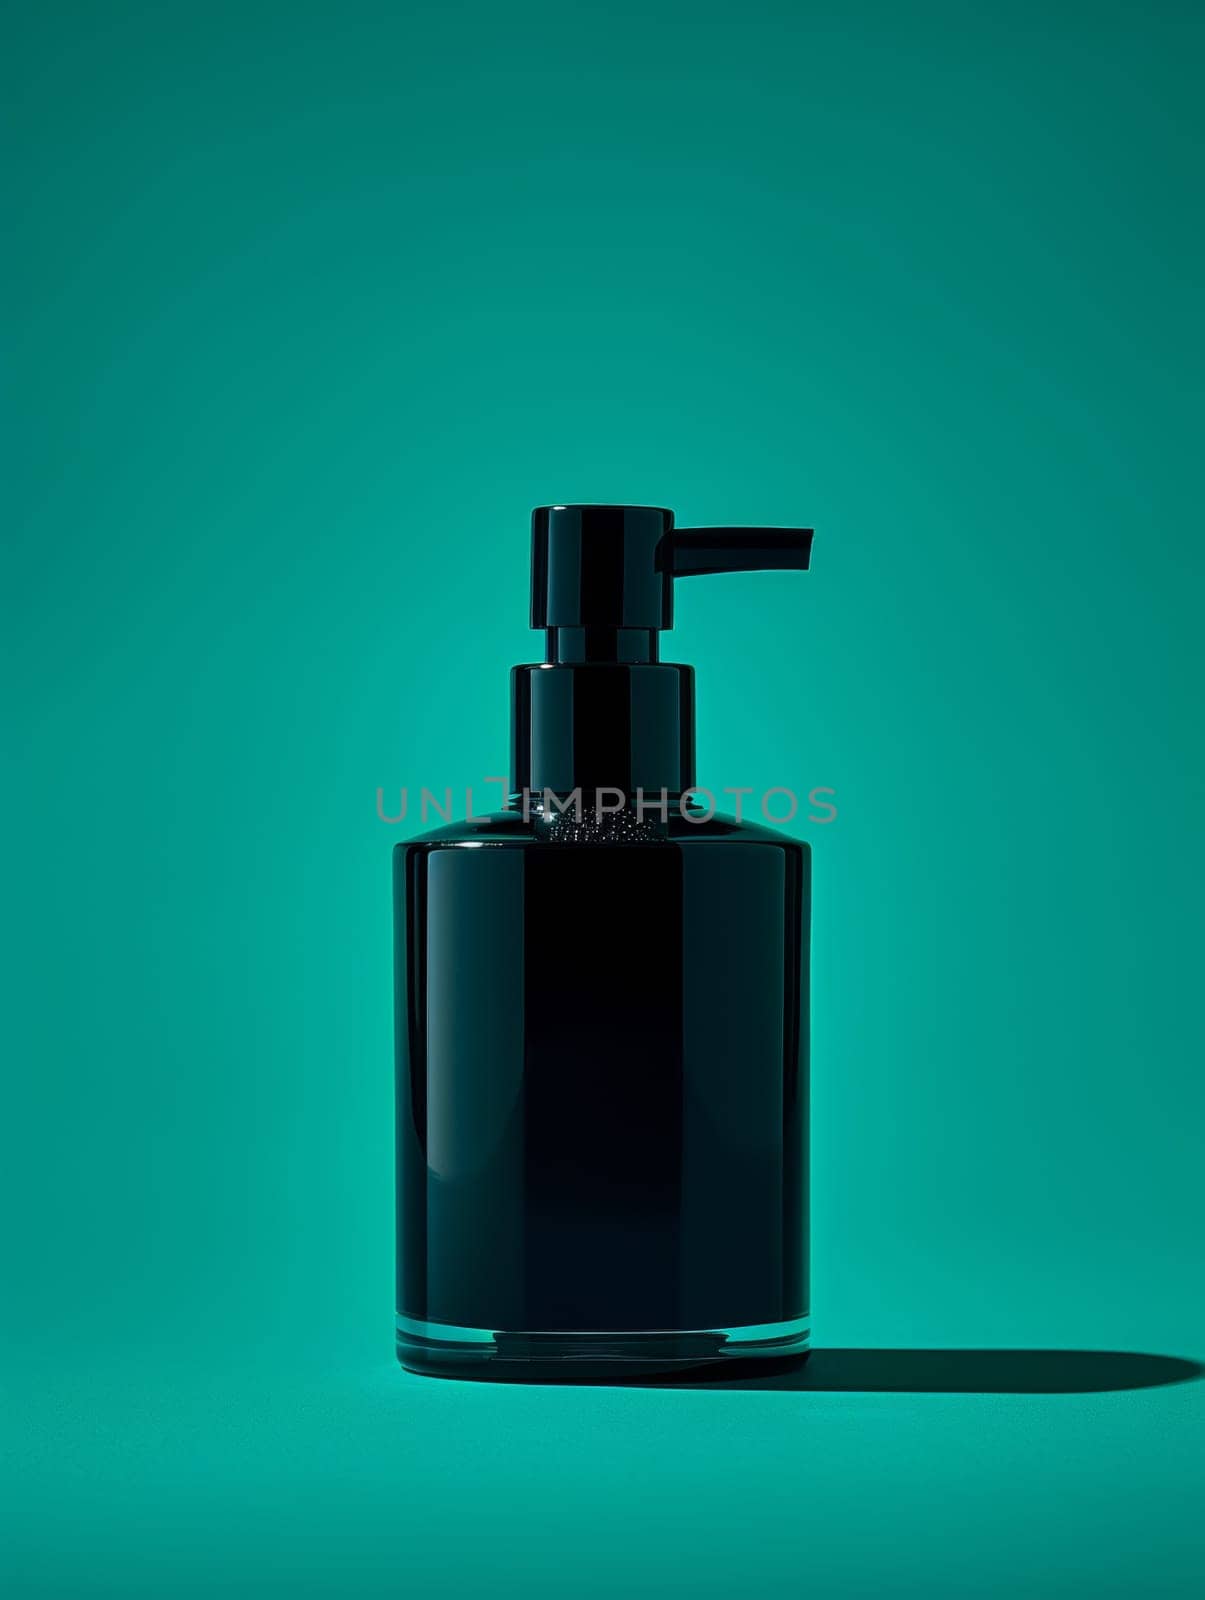 A black bottle of lotion on a green background